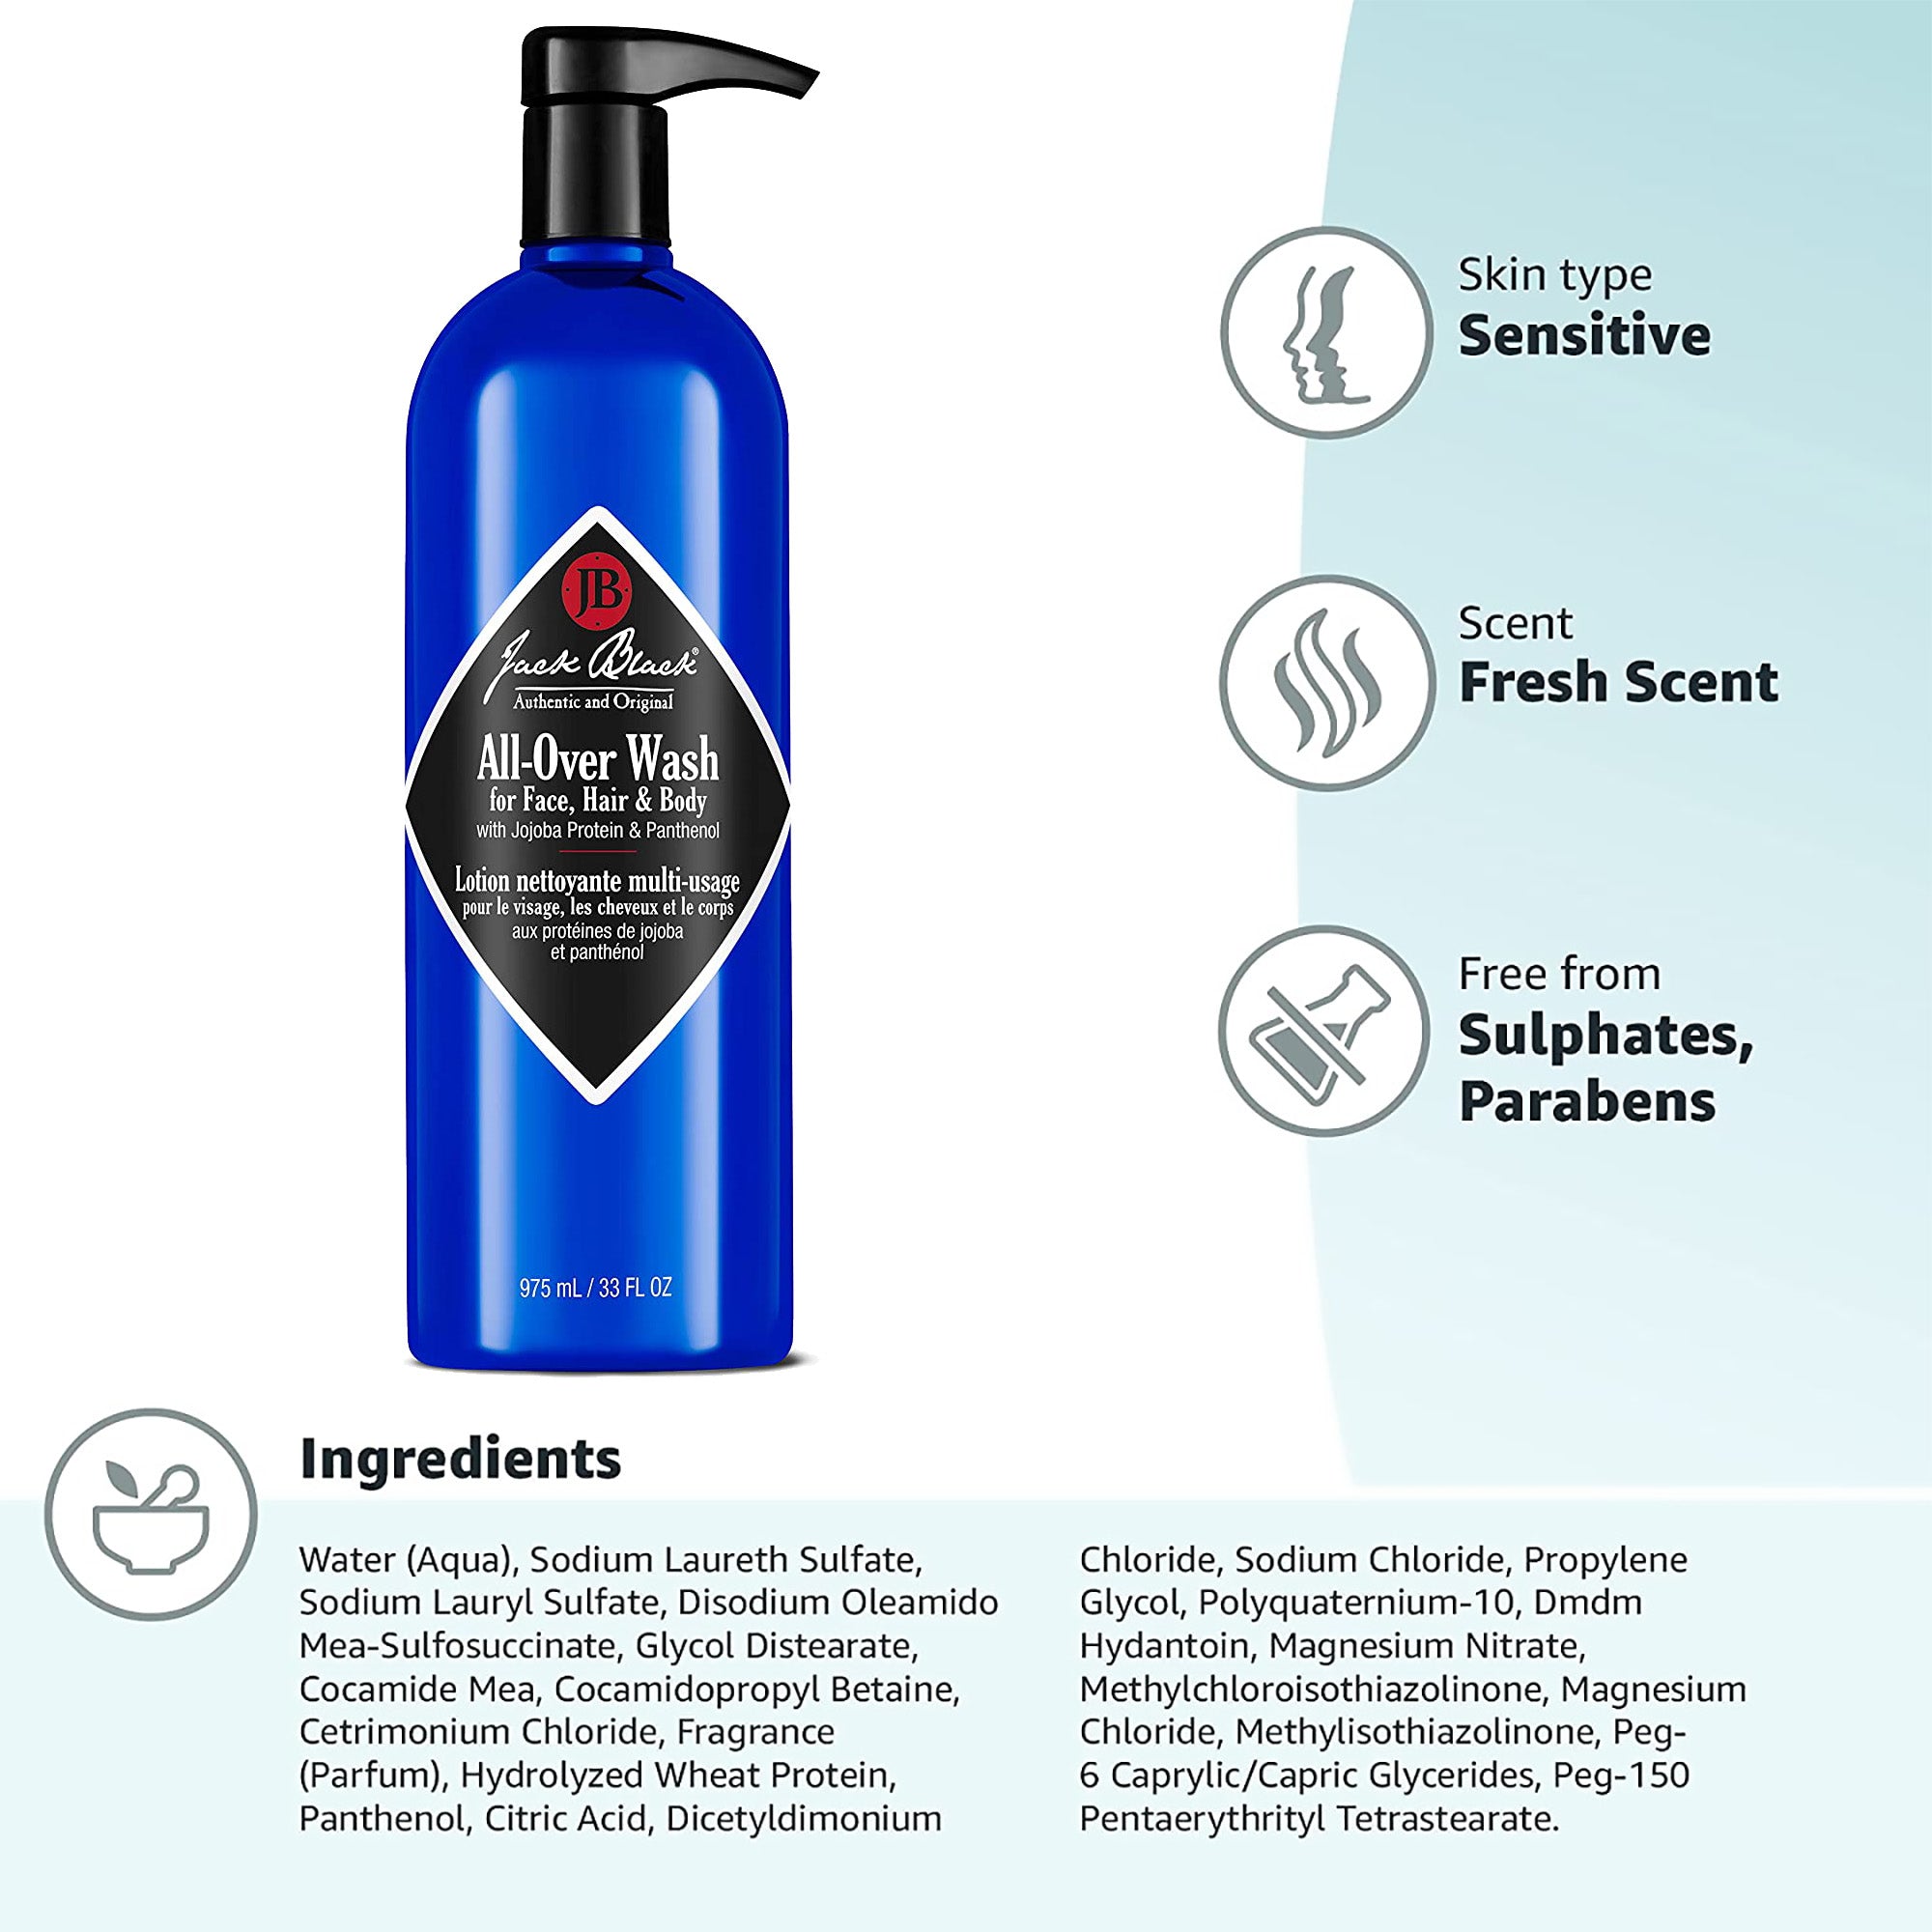 Jack Black All-Over Wash for Face, Hair & Body / 33OZ